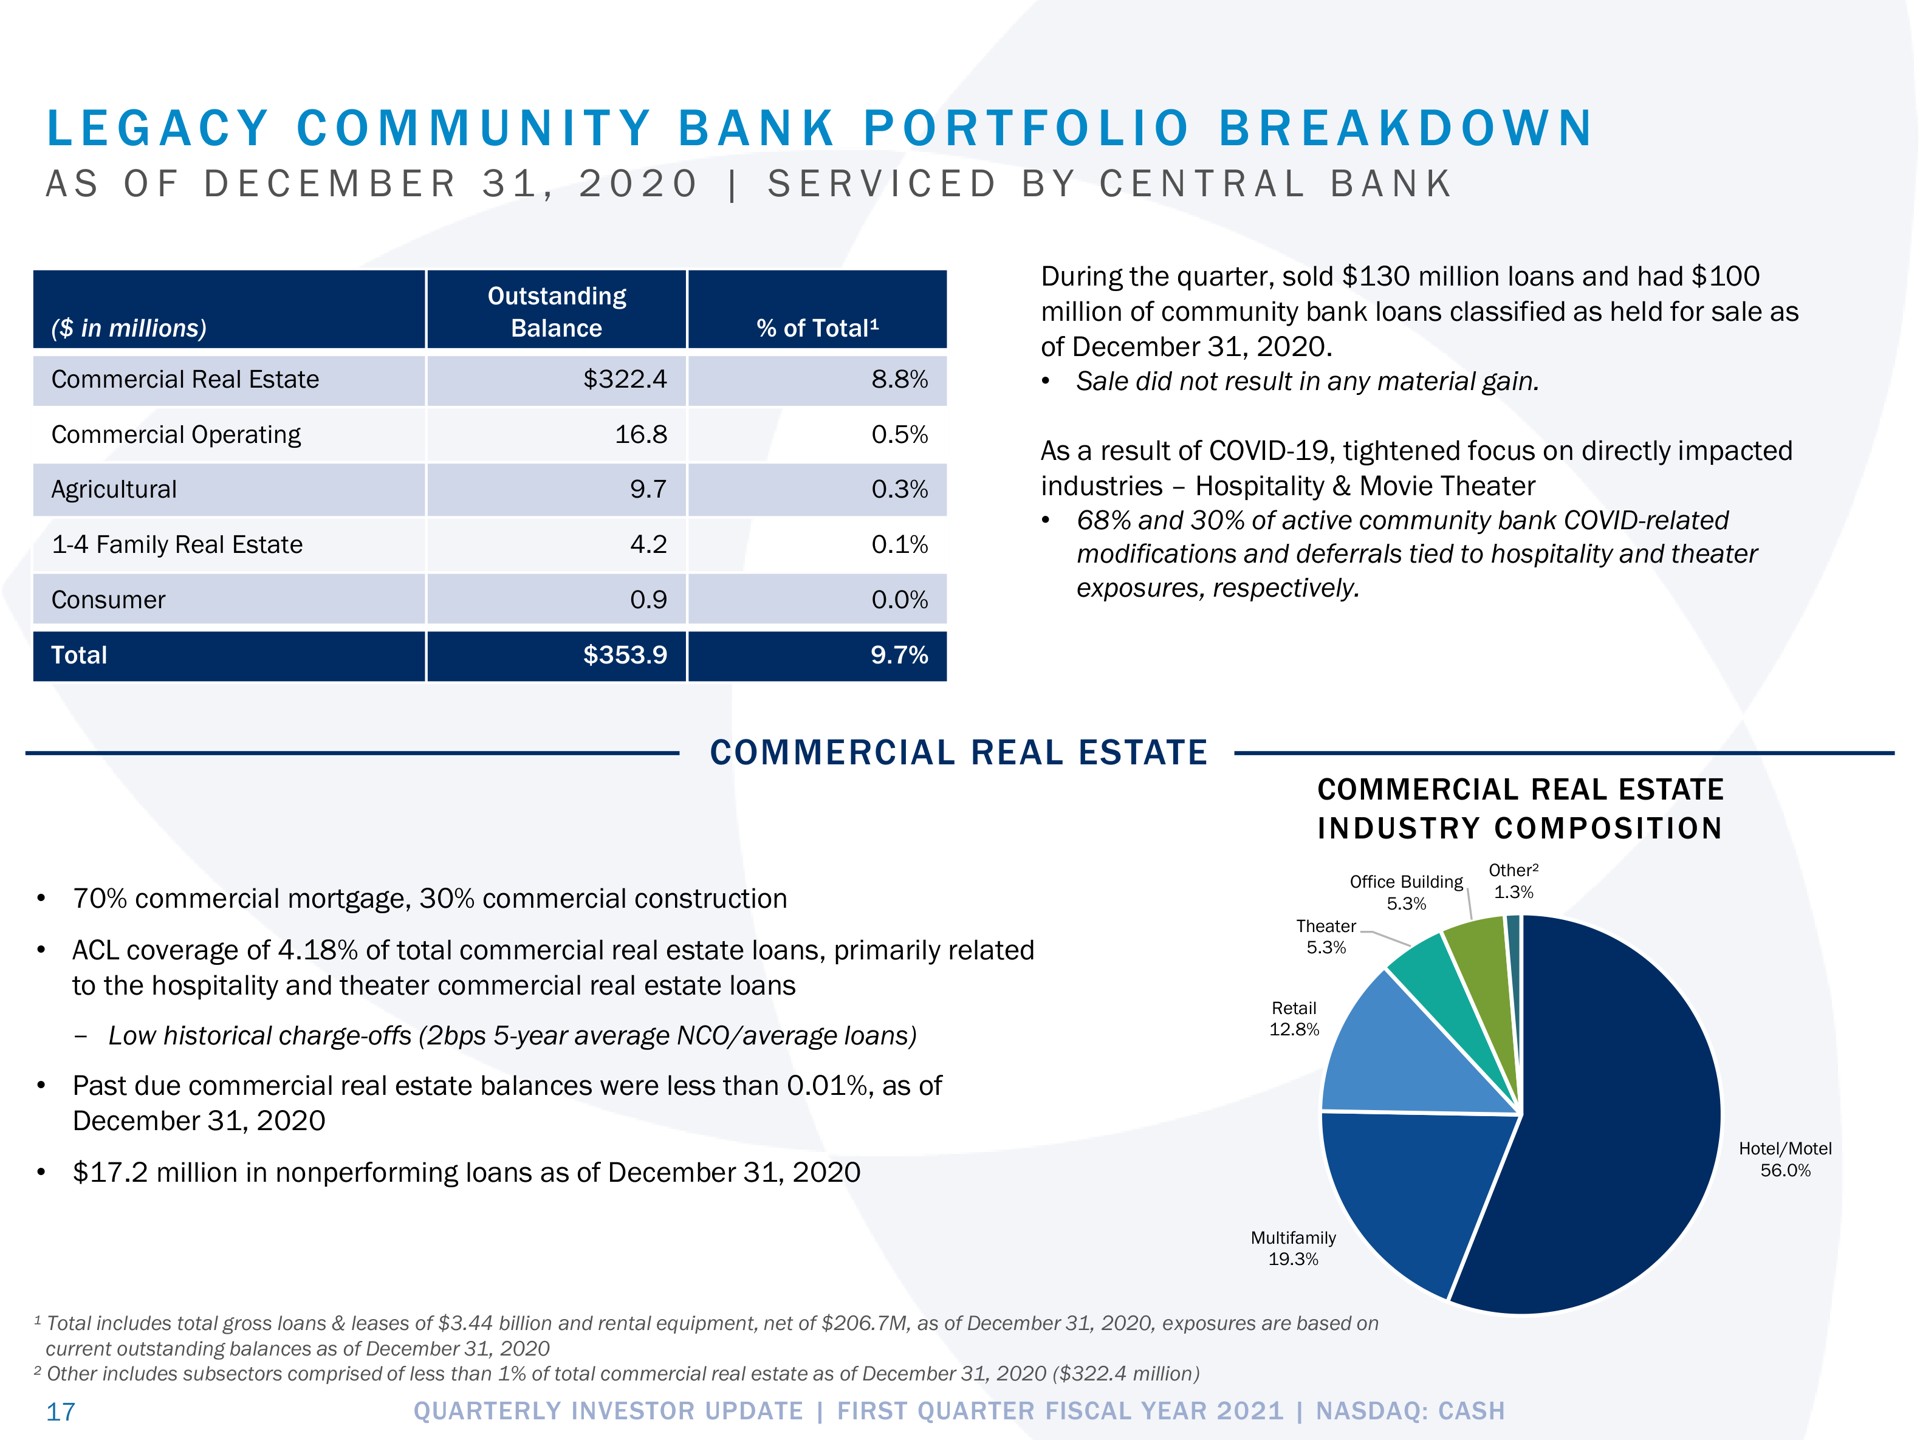 a i a i a a i a a commercial real estate legacy community bank portfolio breakdown as of serviced by central bank | Pathward Financial